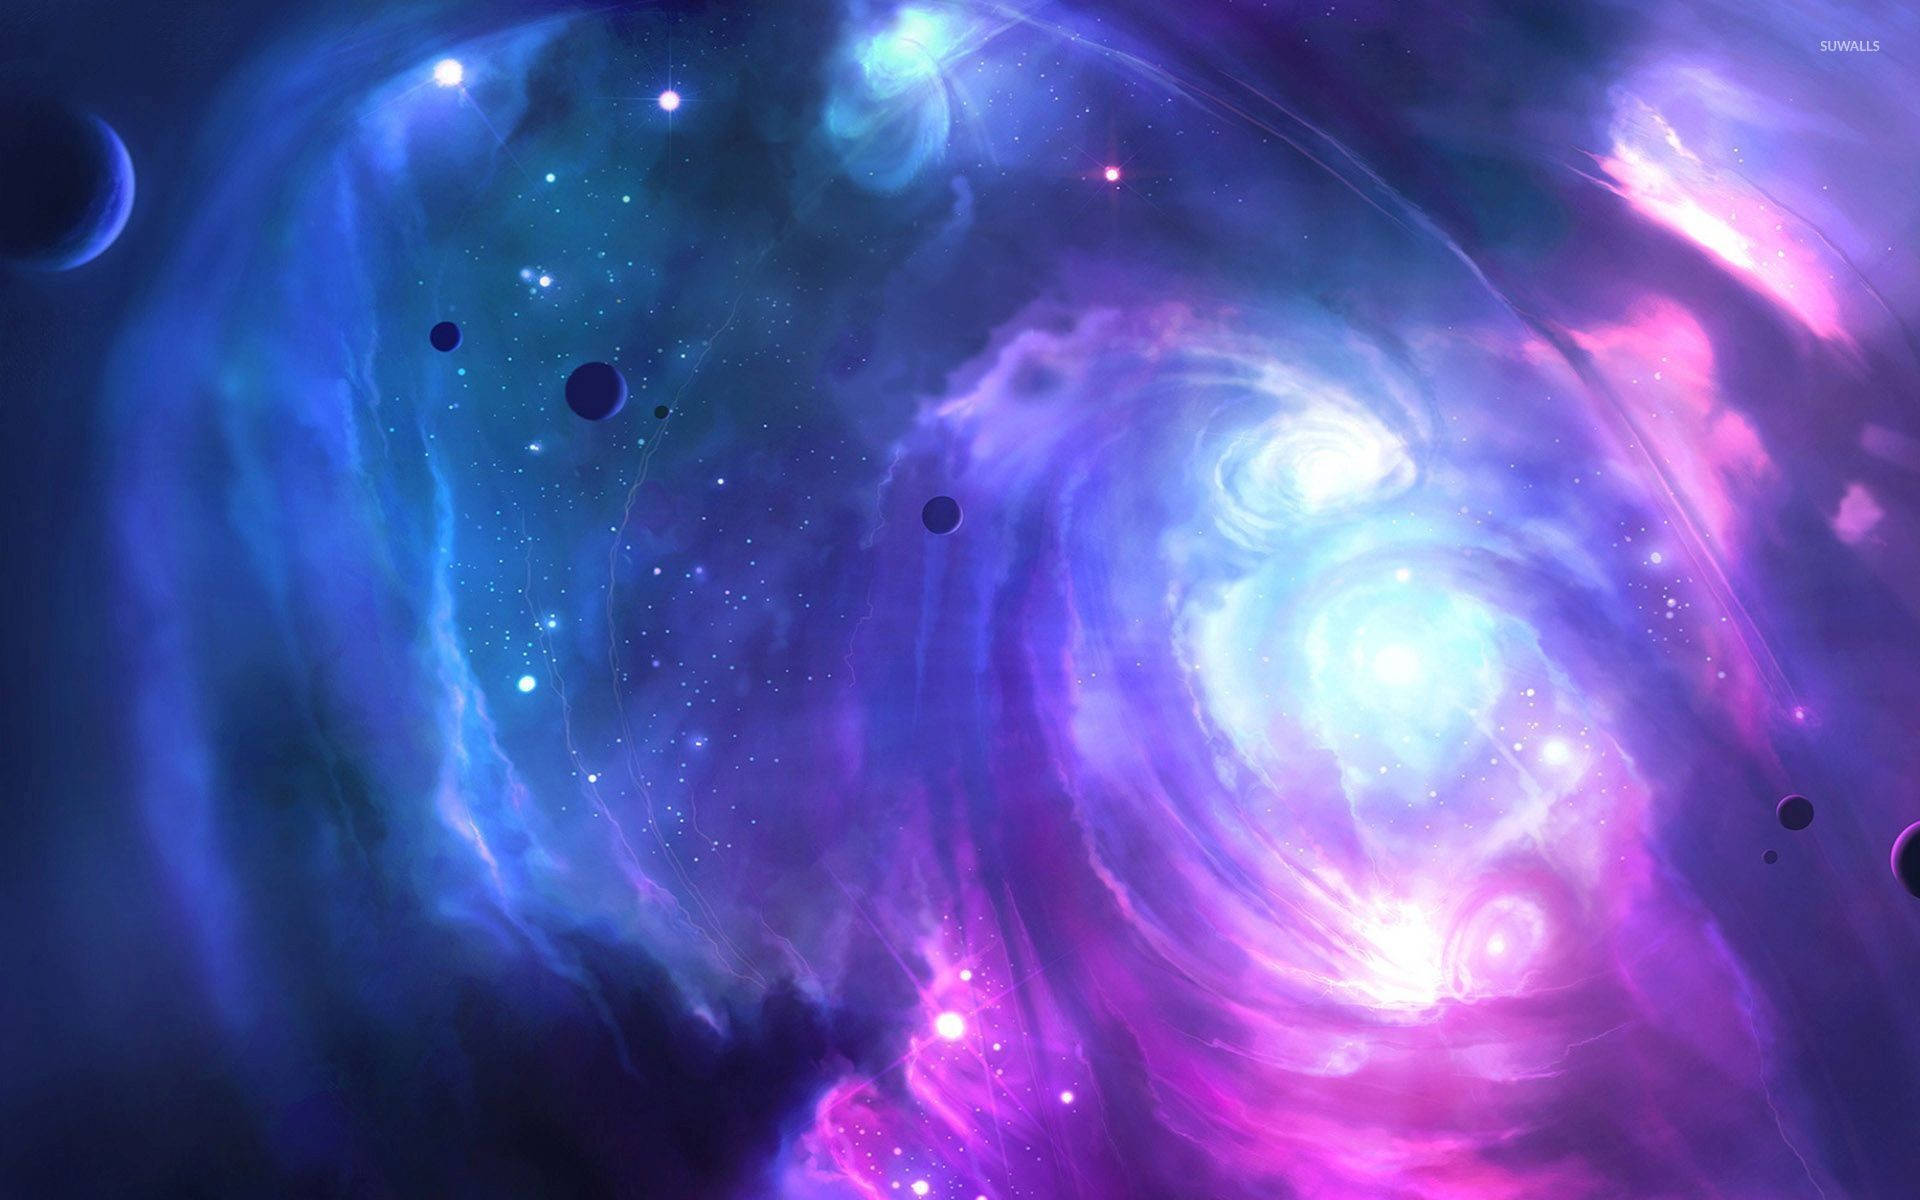 Swirling Blue And Pink Galaxy Wallpaper